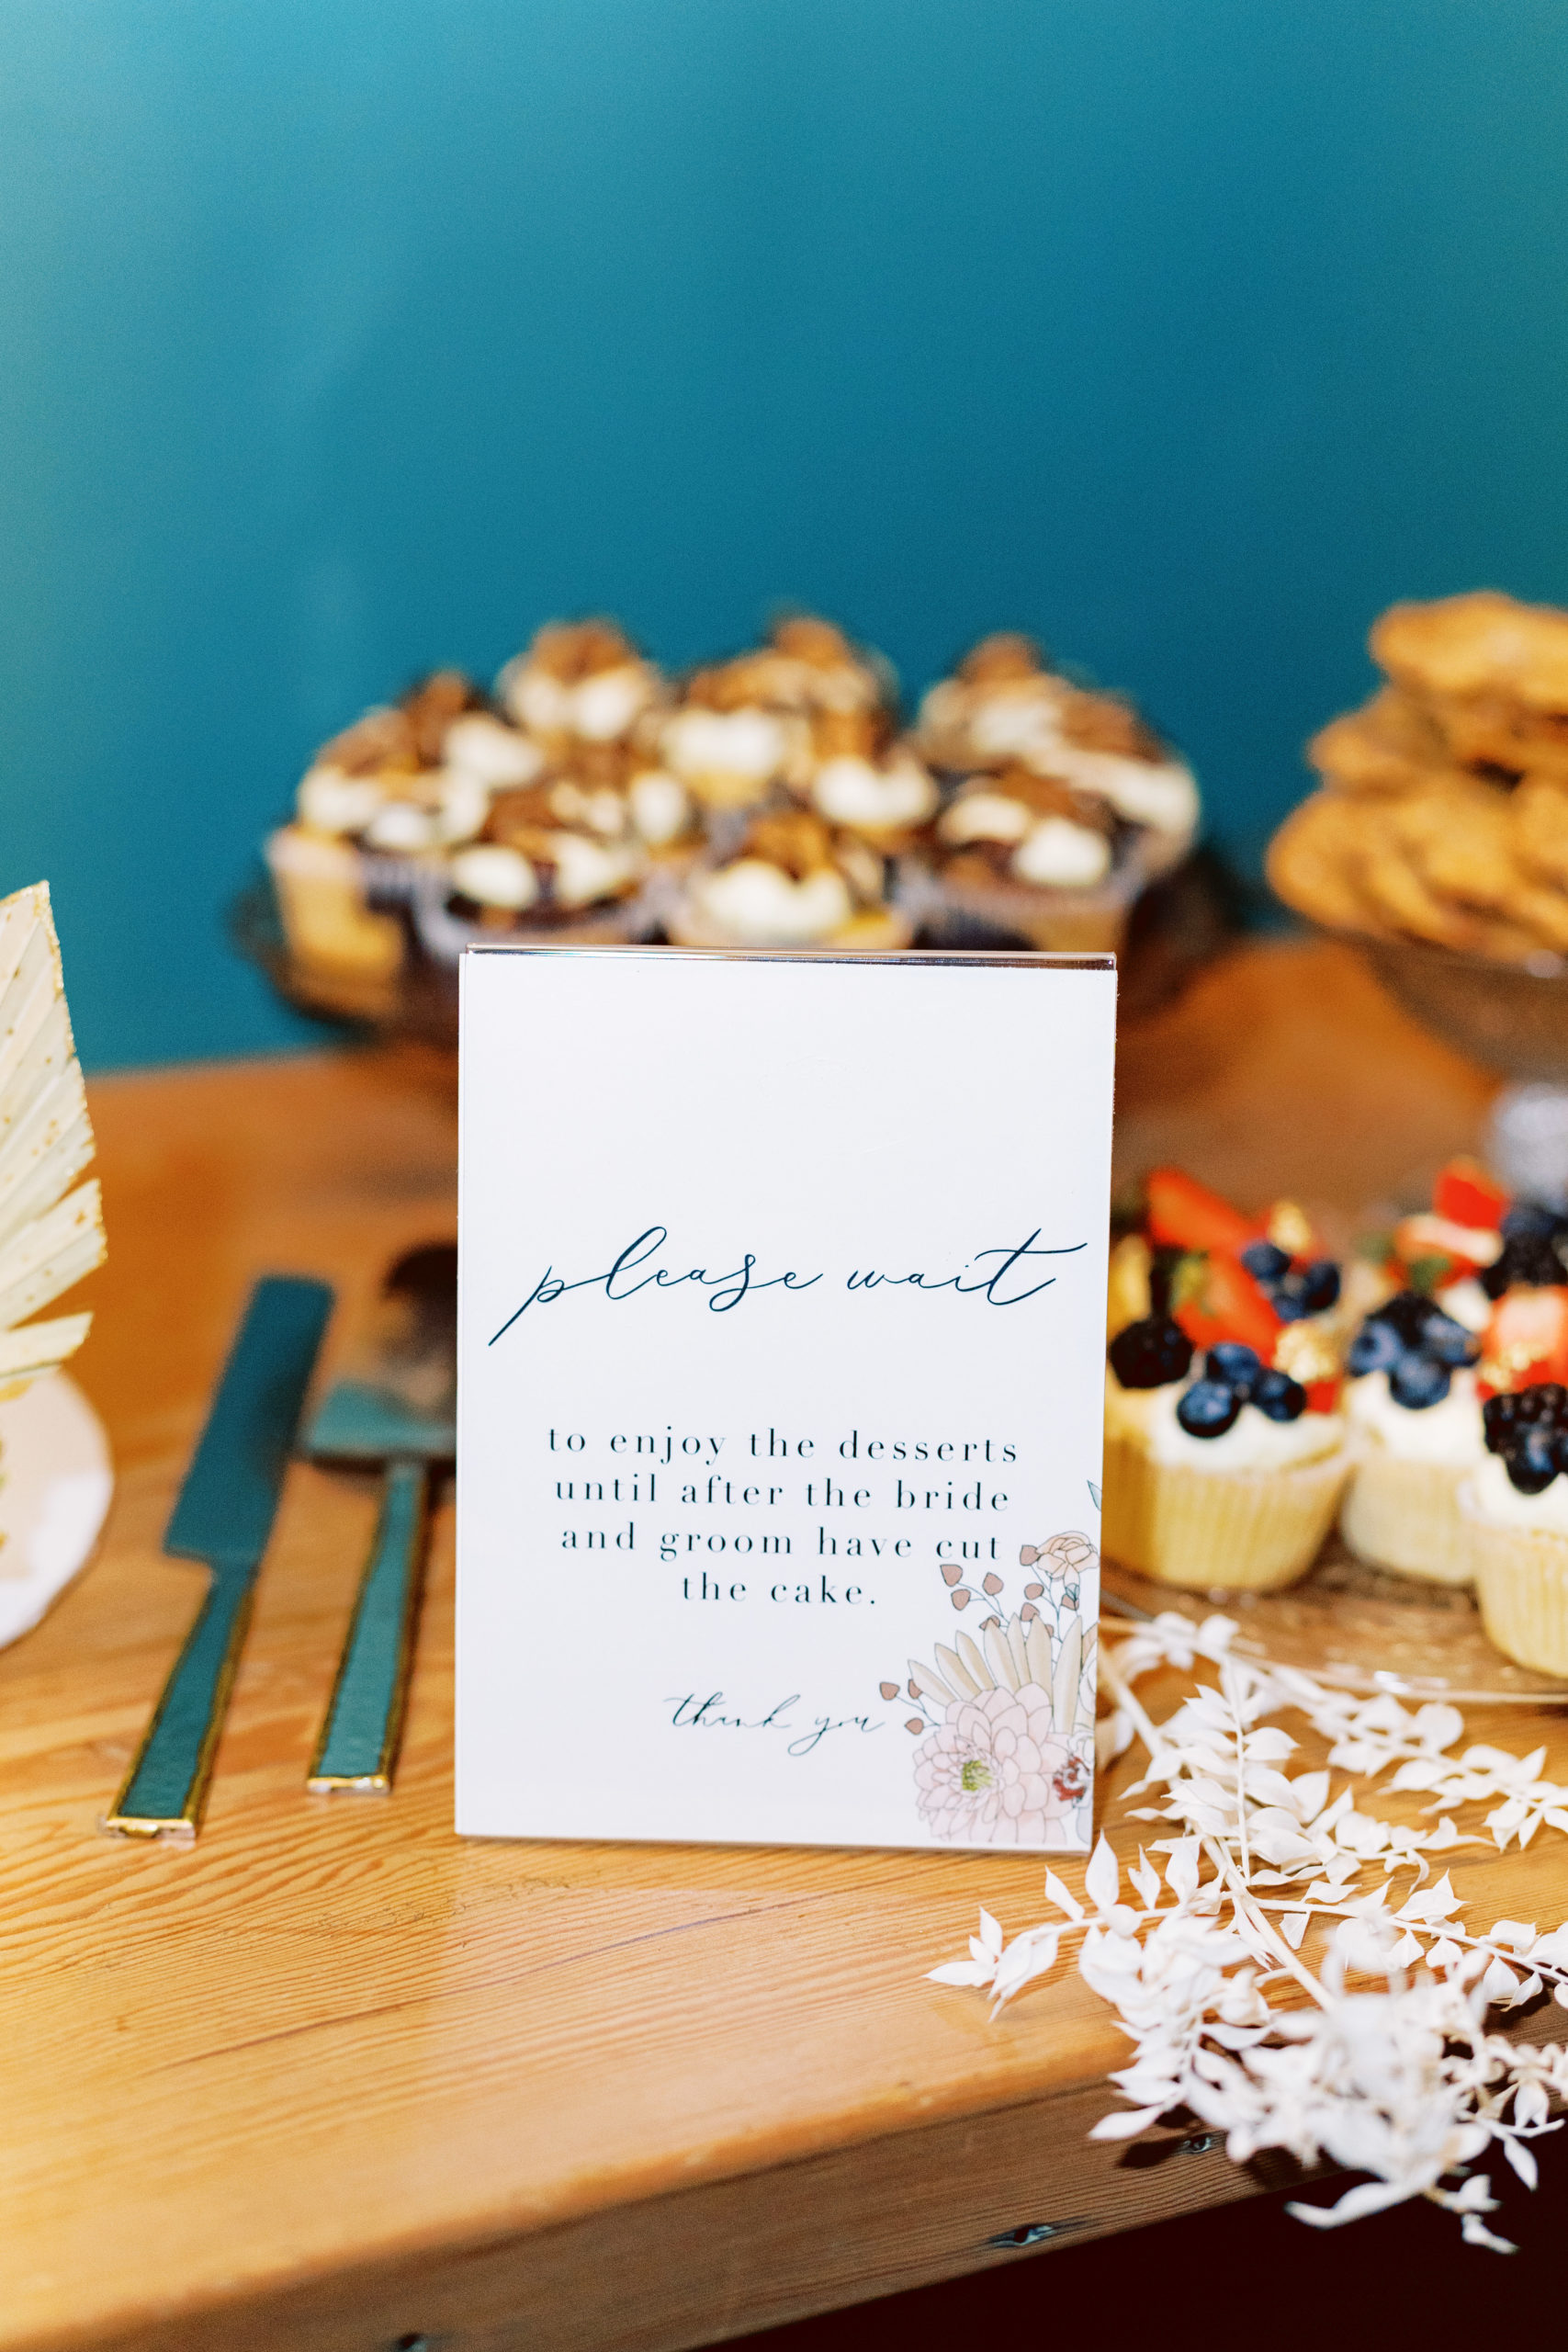 dessert table sign instructing guests to wait to eat the desserts